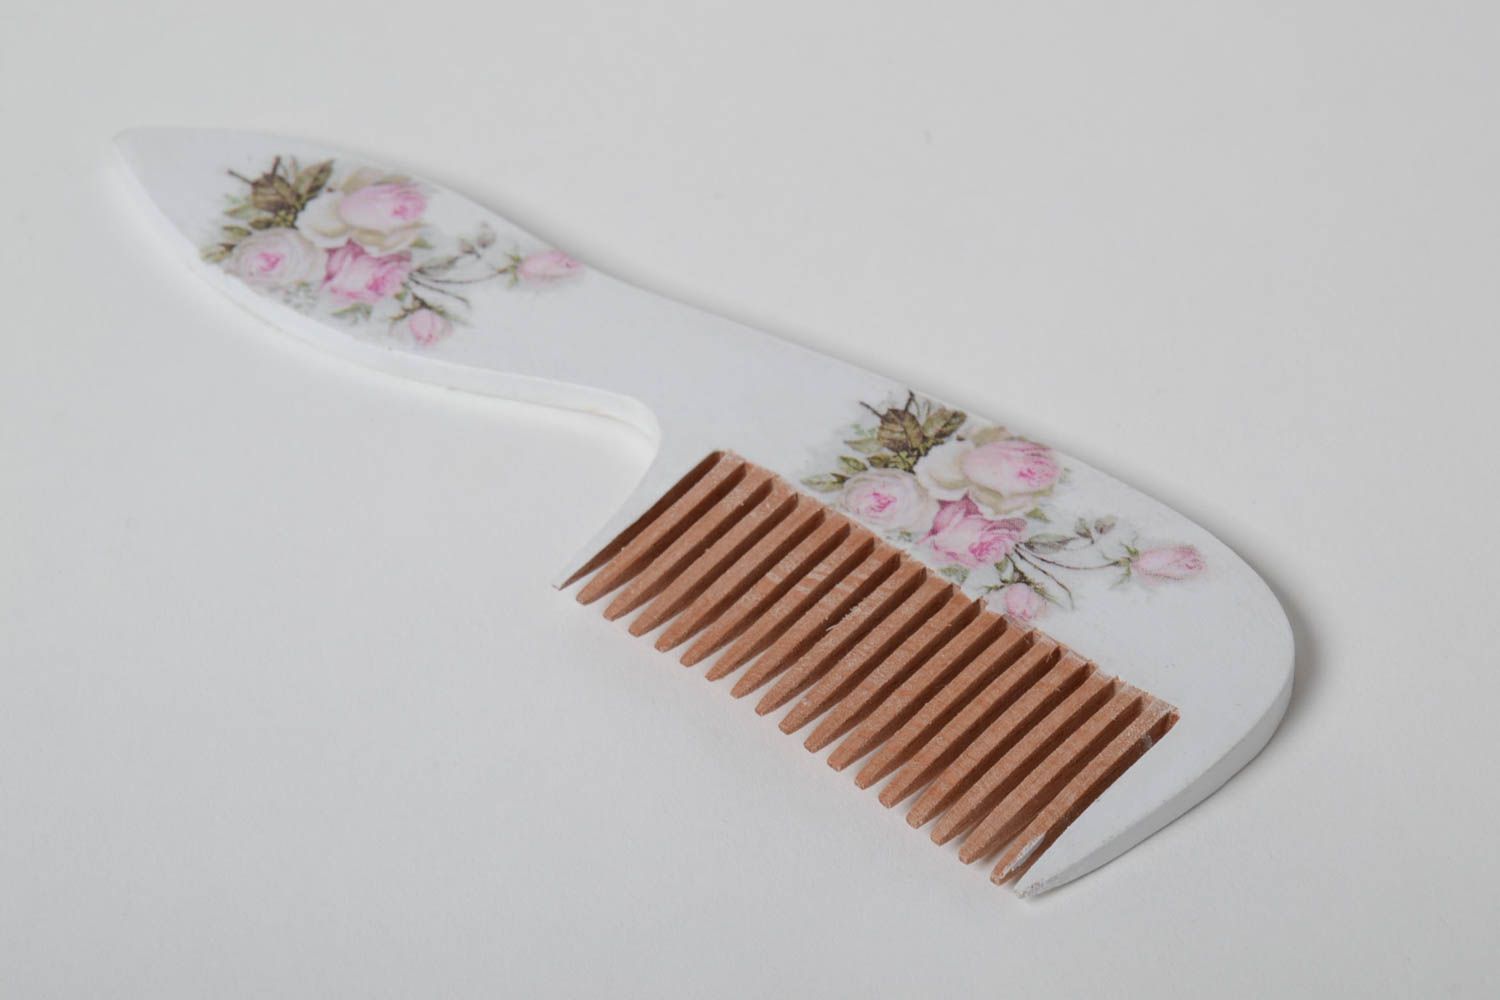 Handmade wooden comb stylish accessories flower beautiful present for girls photo 2